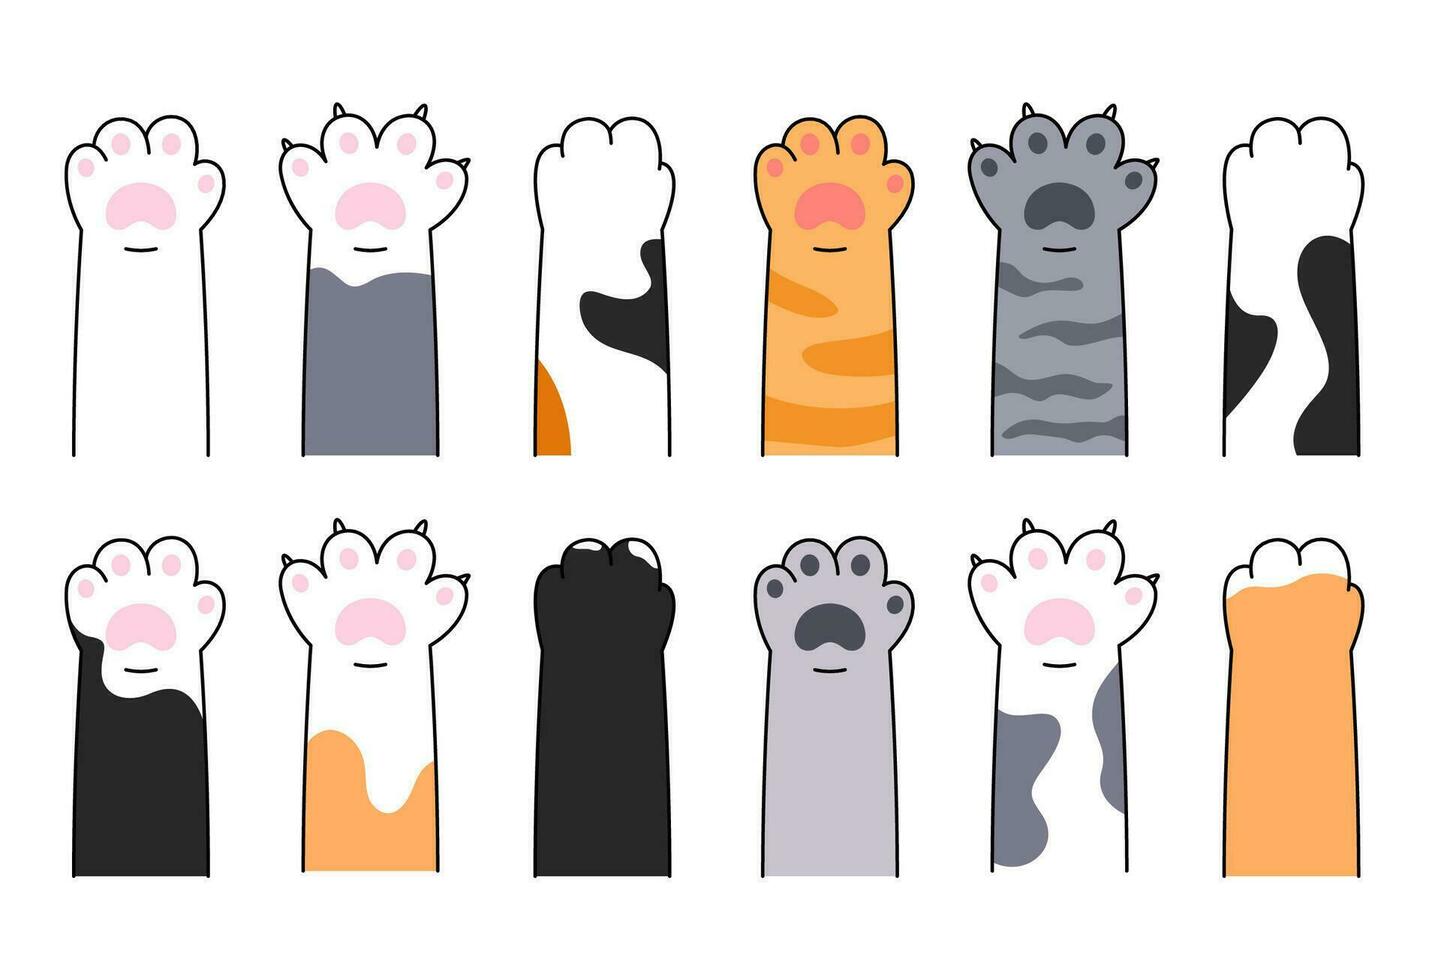 Cat paws, pet, animal hand,  set of comic, cartoon style illustrations. Vector doodle drawings.